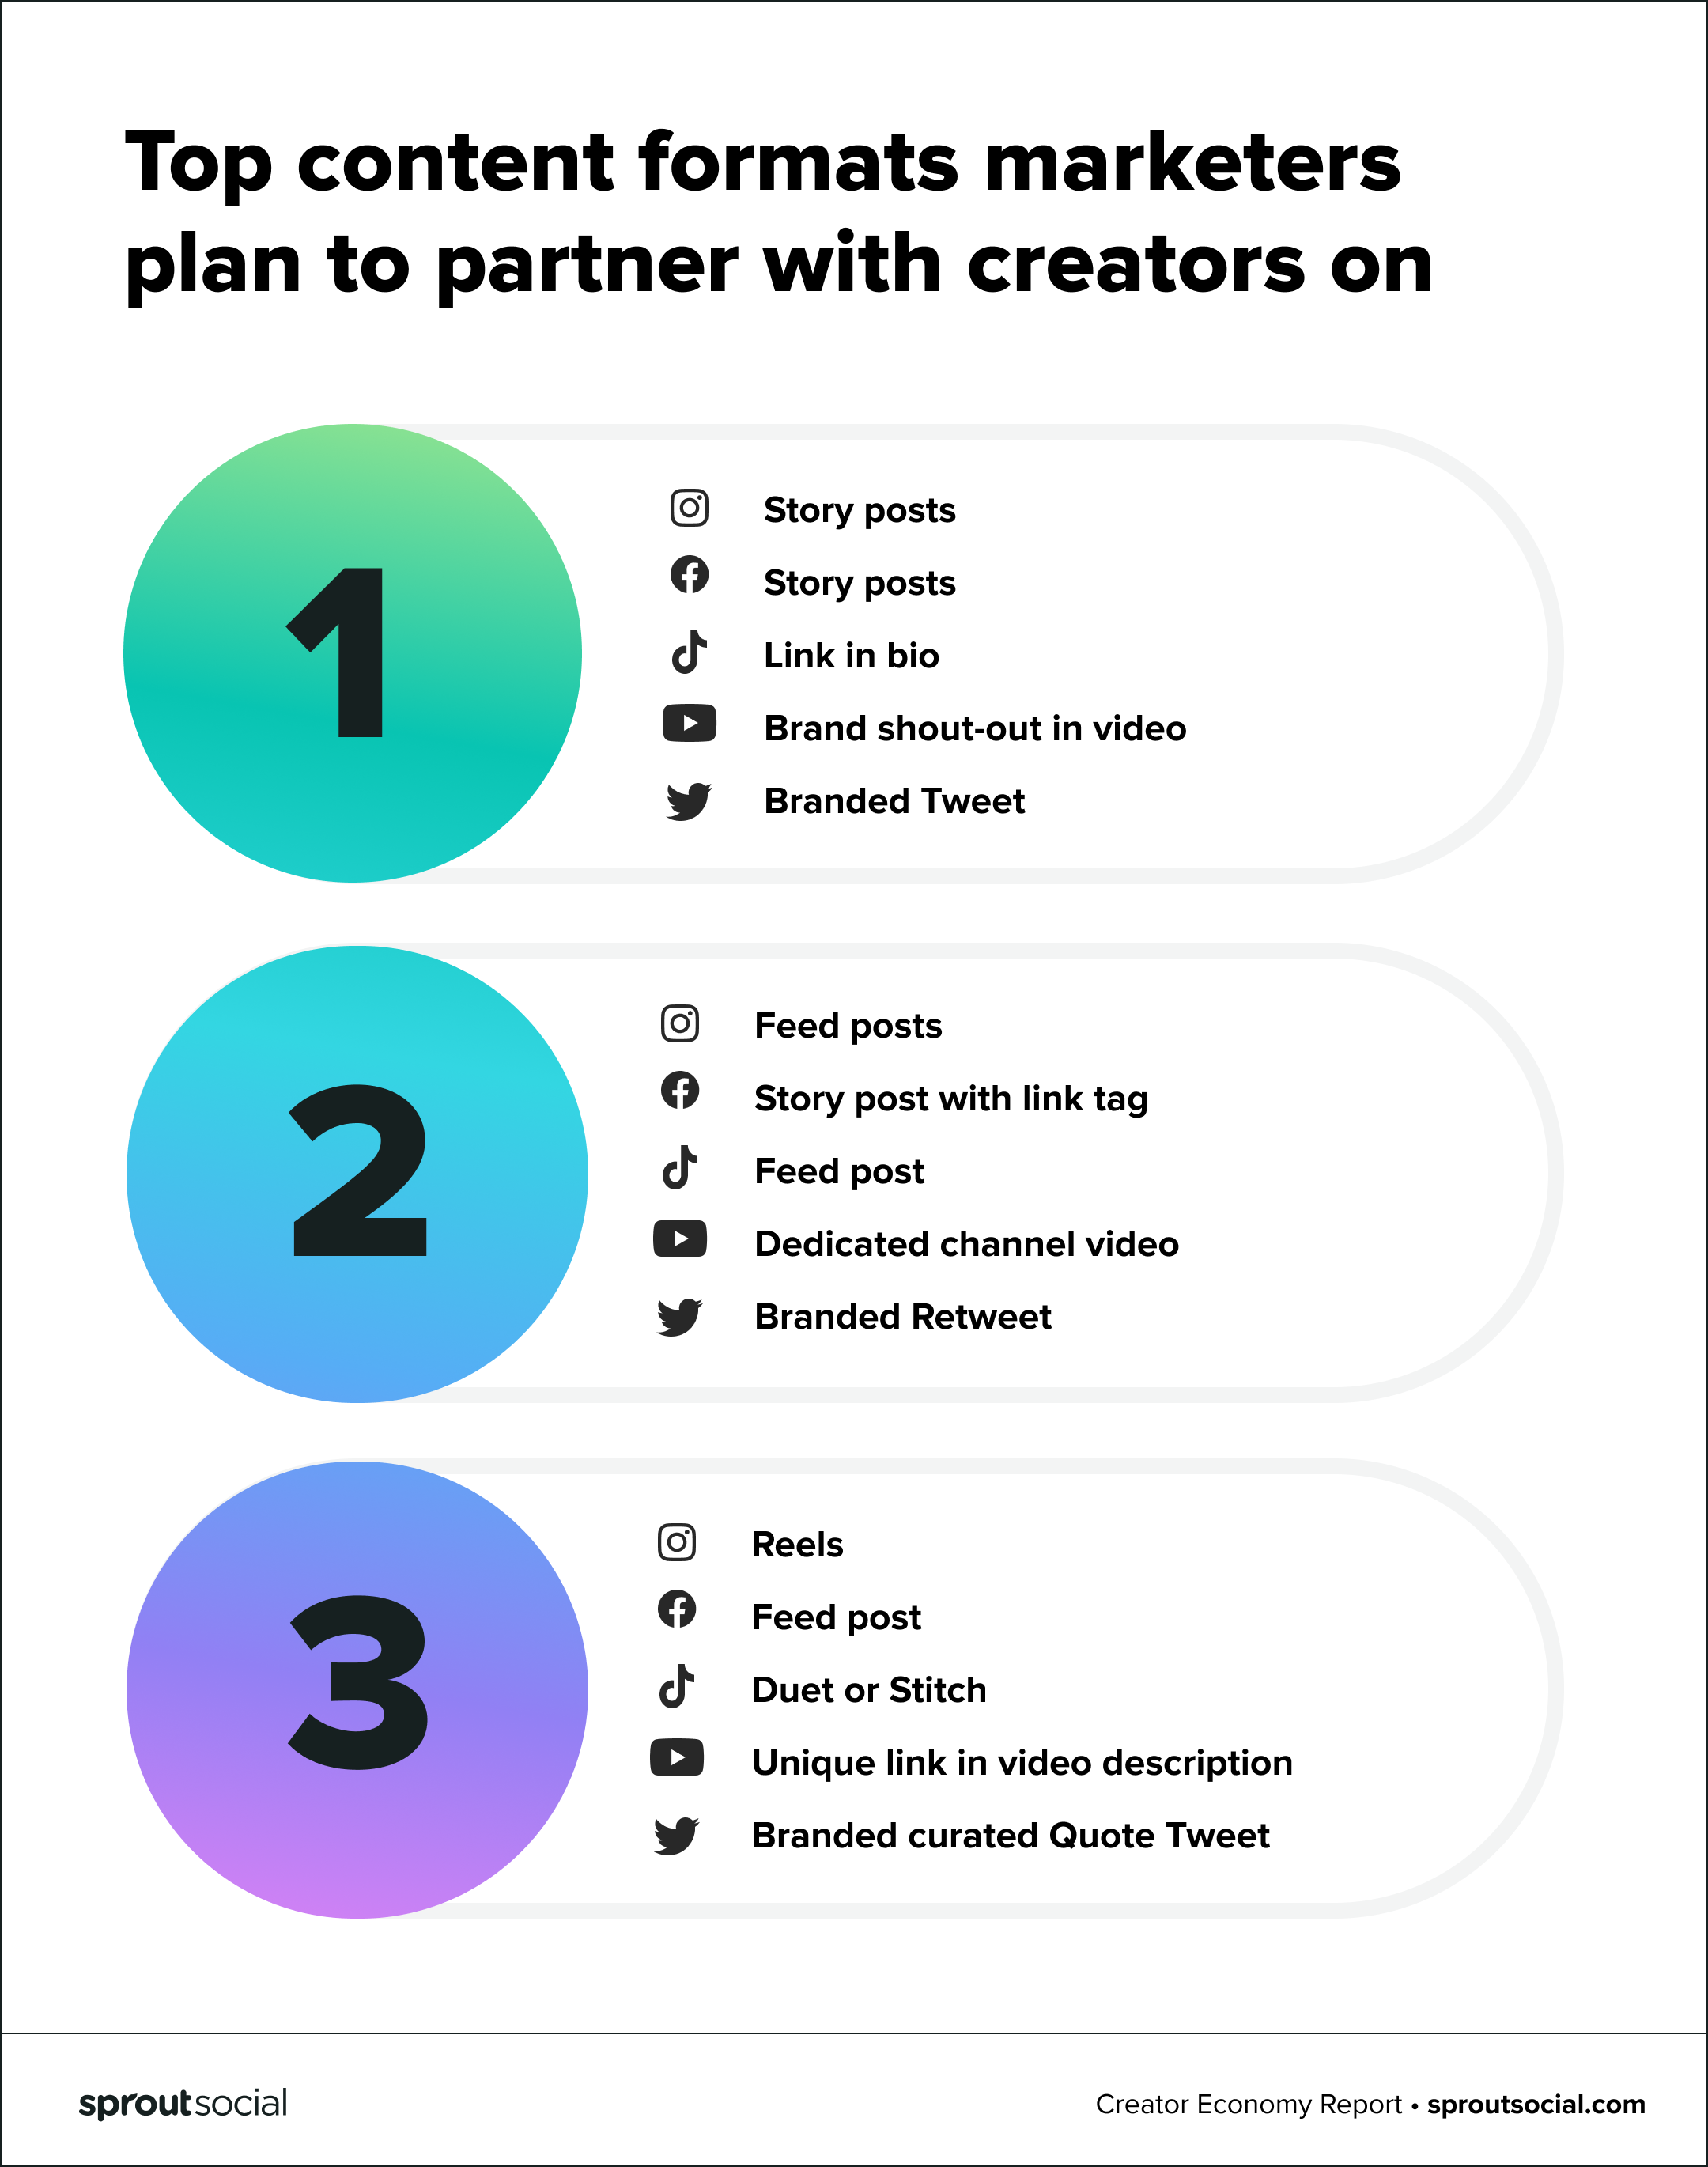 Top content formats marketers plan to partner with creators on